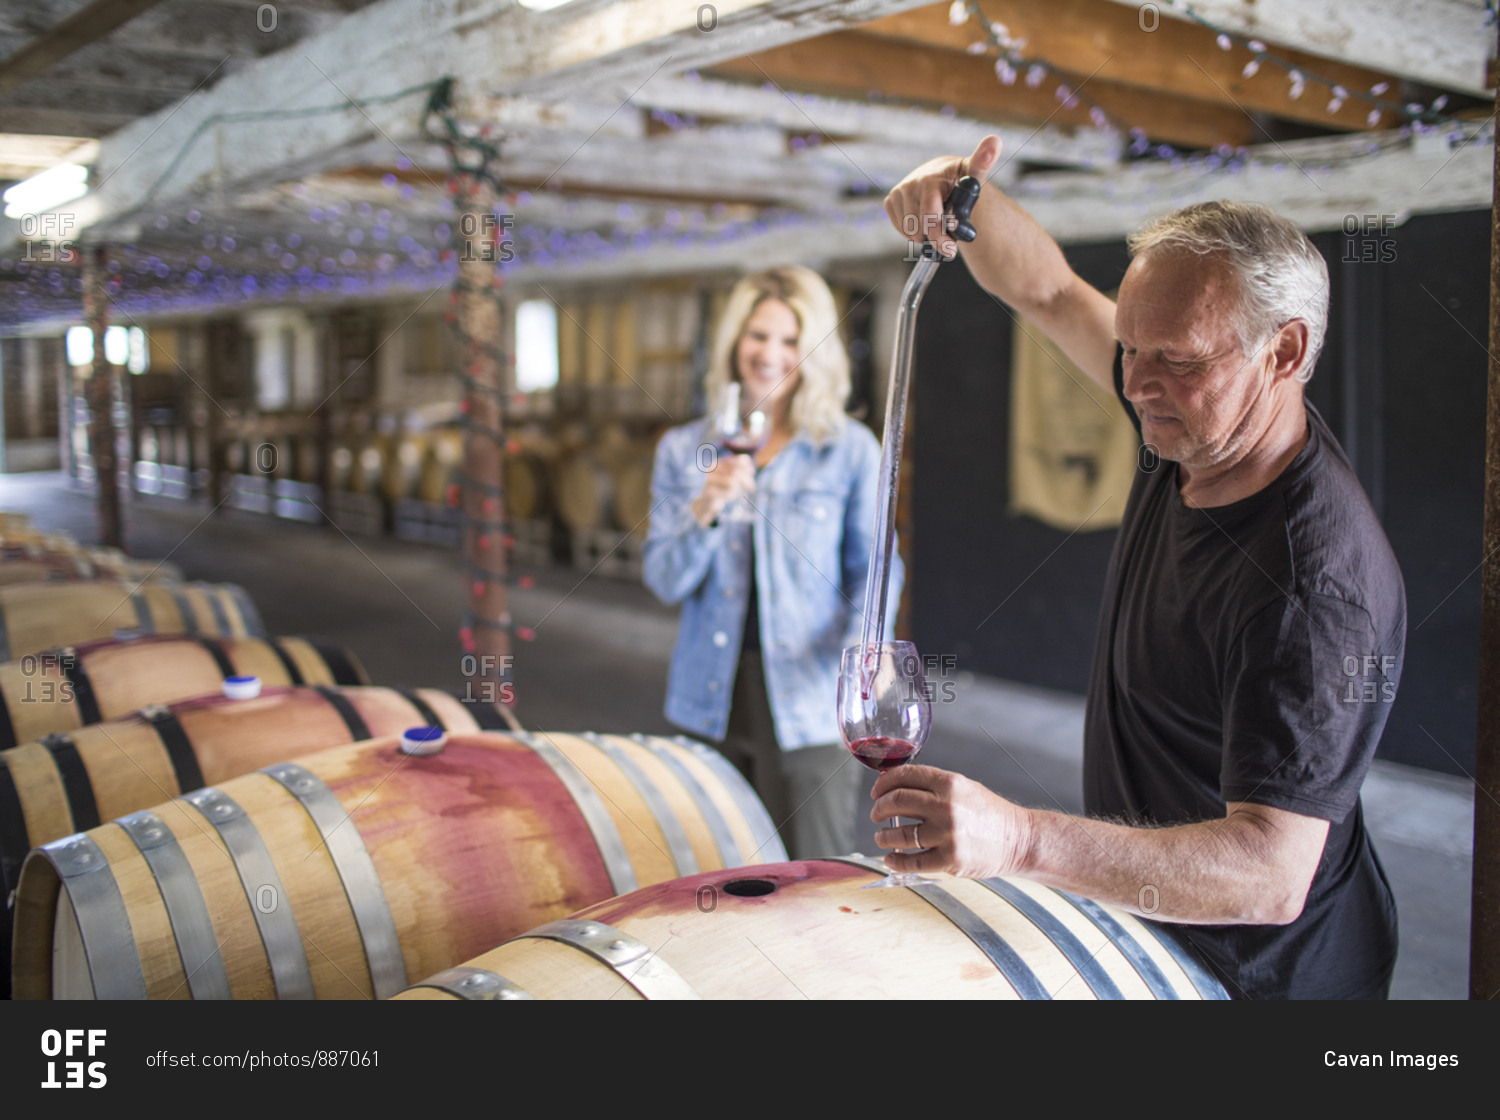 sommelier extracts wine from a barrel during a wine tour.